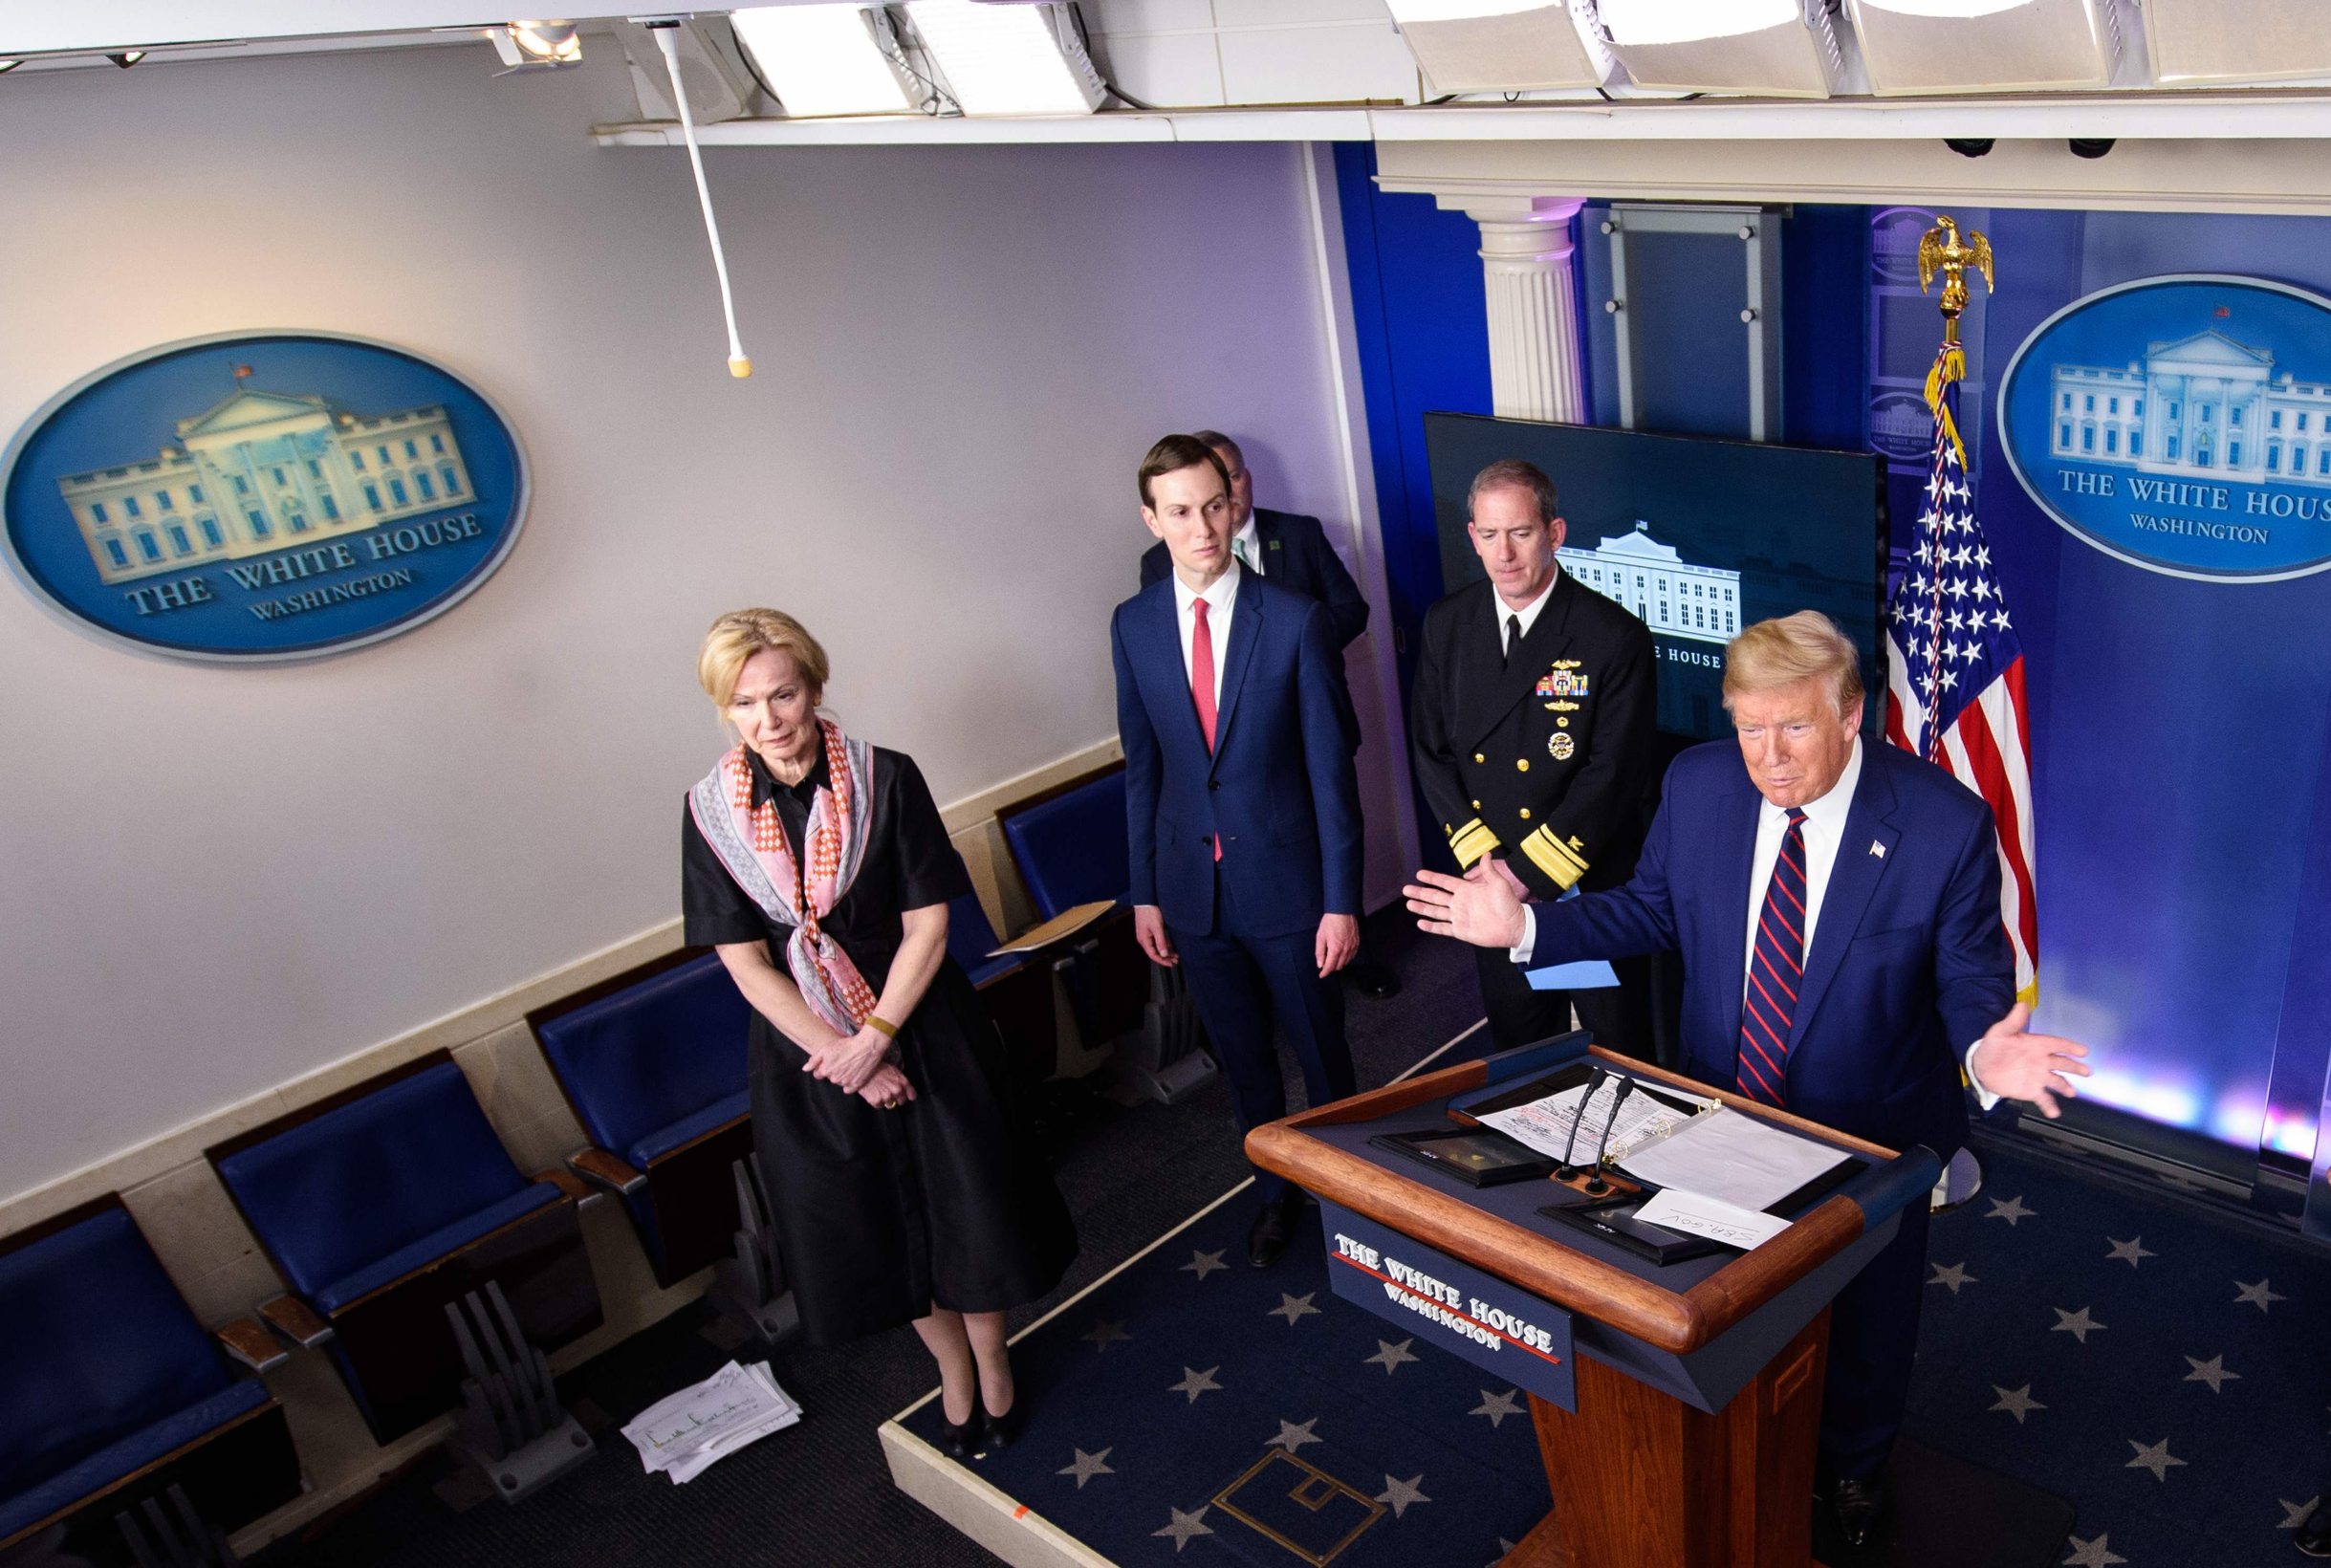 US President Donald Trump speaks, flanked by (From L) Response coordinator for White House Coronavirus Task Force Deborah Birx, Senior Advisor to the President Jared Kushner, Rear Adm. John Polowczyk, during the daily briefing on the novel coronavirus, COVID-19, in the Brady Briefing Room at the White House on April 2, 2020, in Washington, DC. (Photo by MANDEL NGAN / AFP)